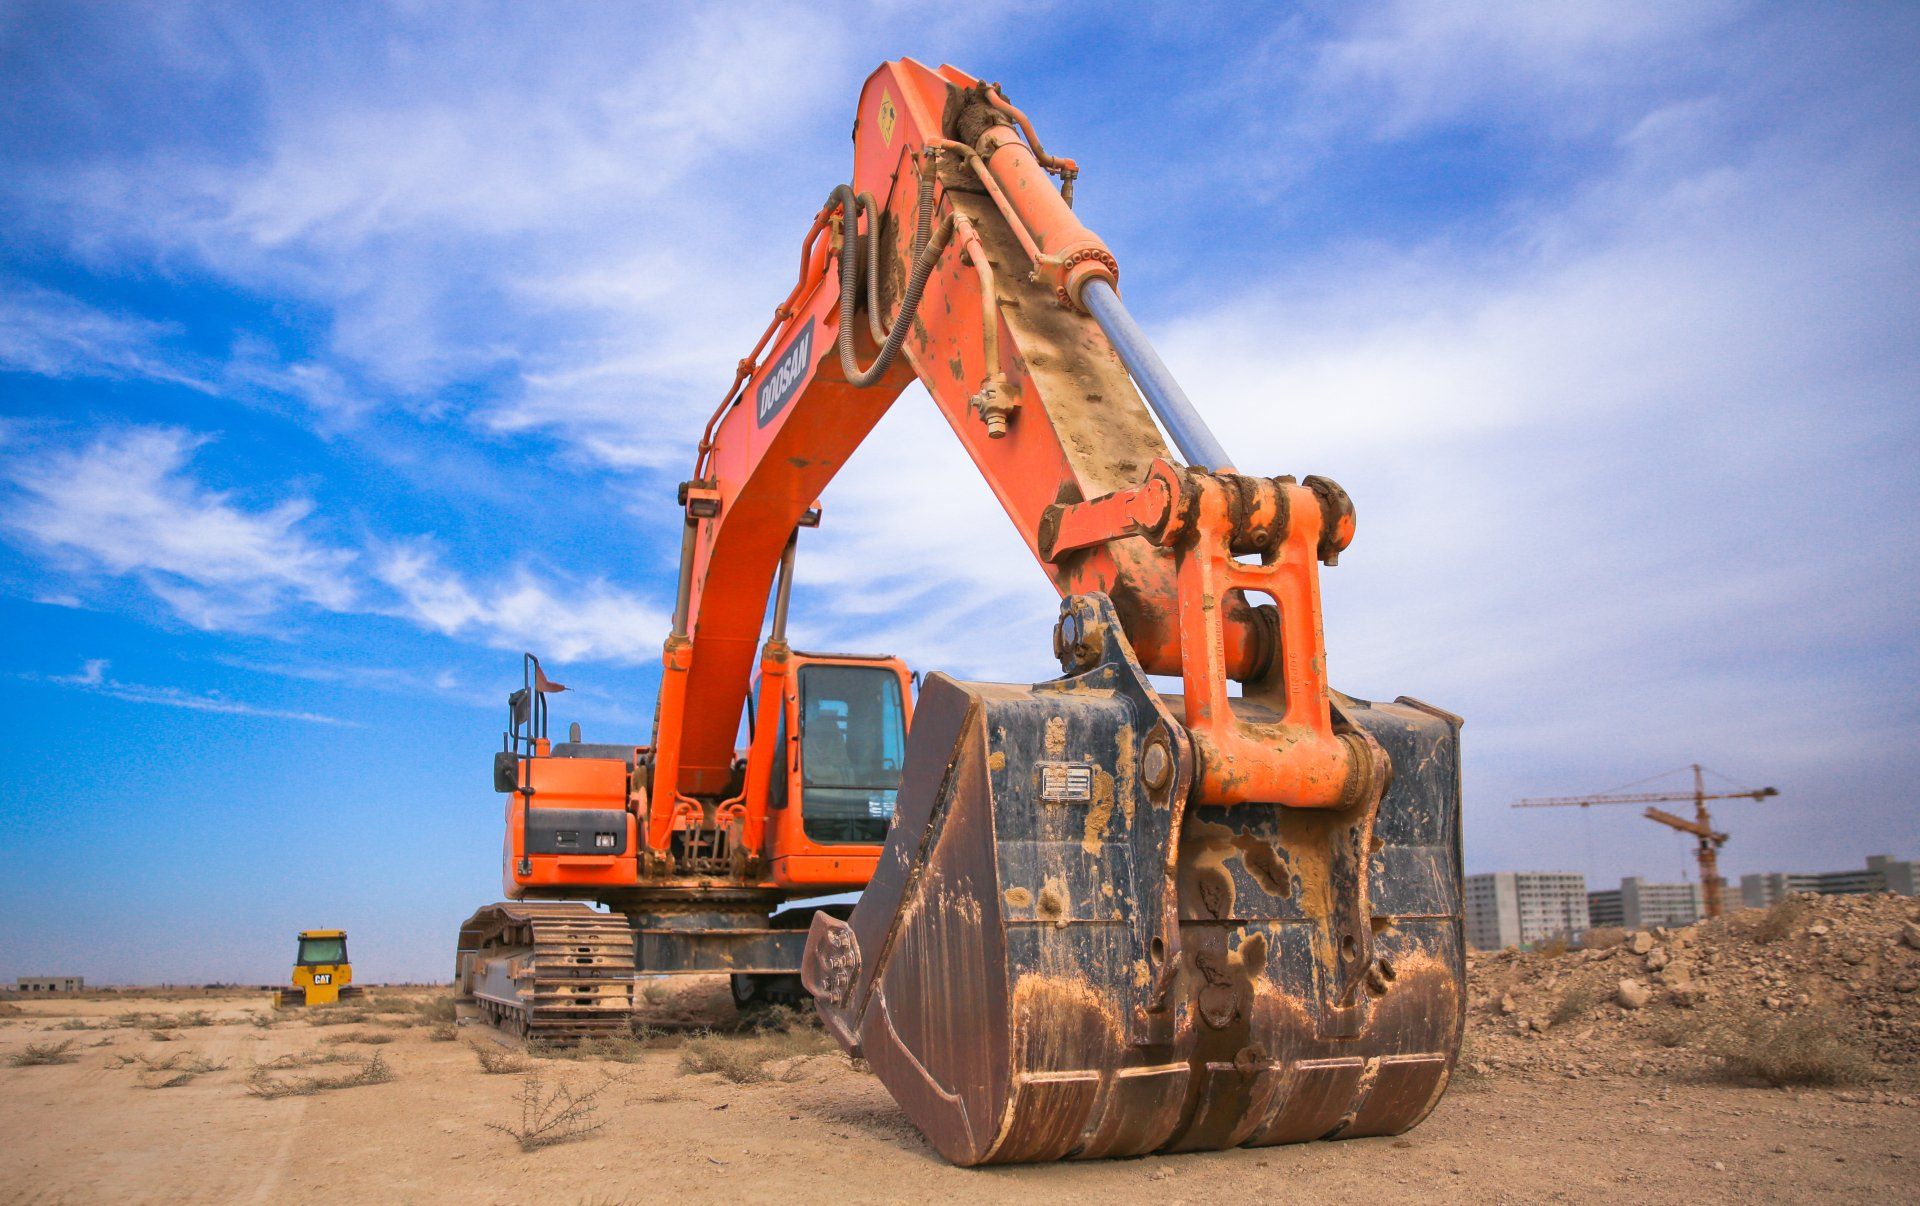 a large orange excavator is sitting on top of a dirt field